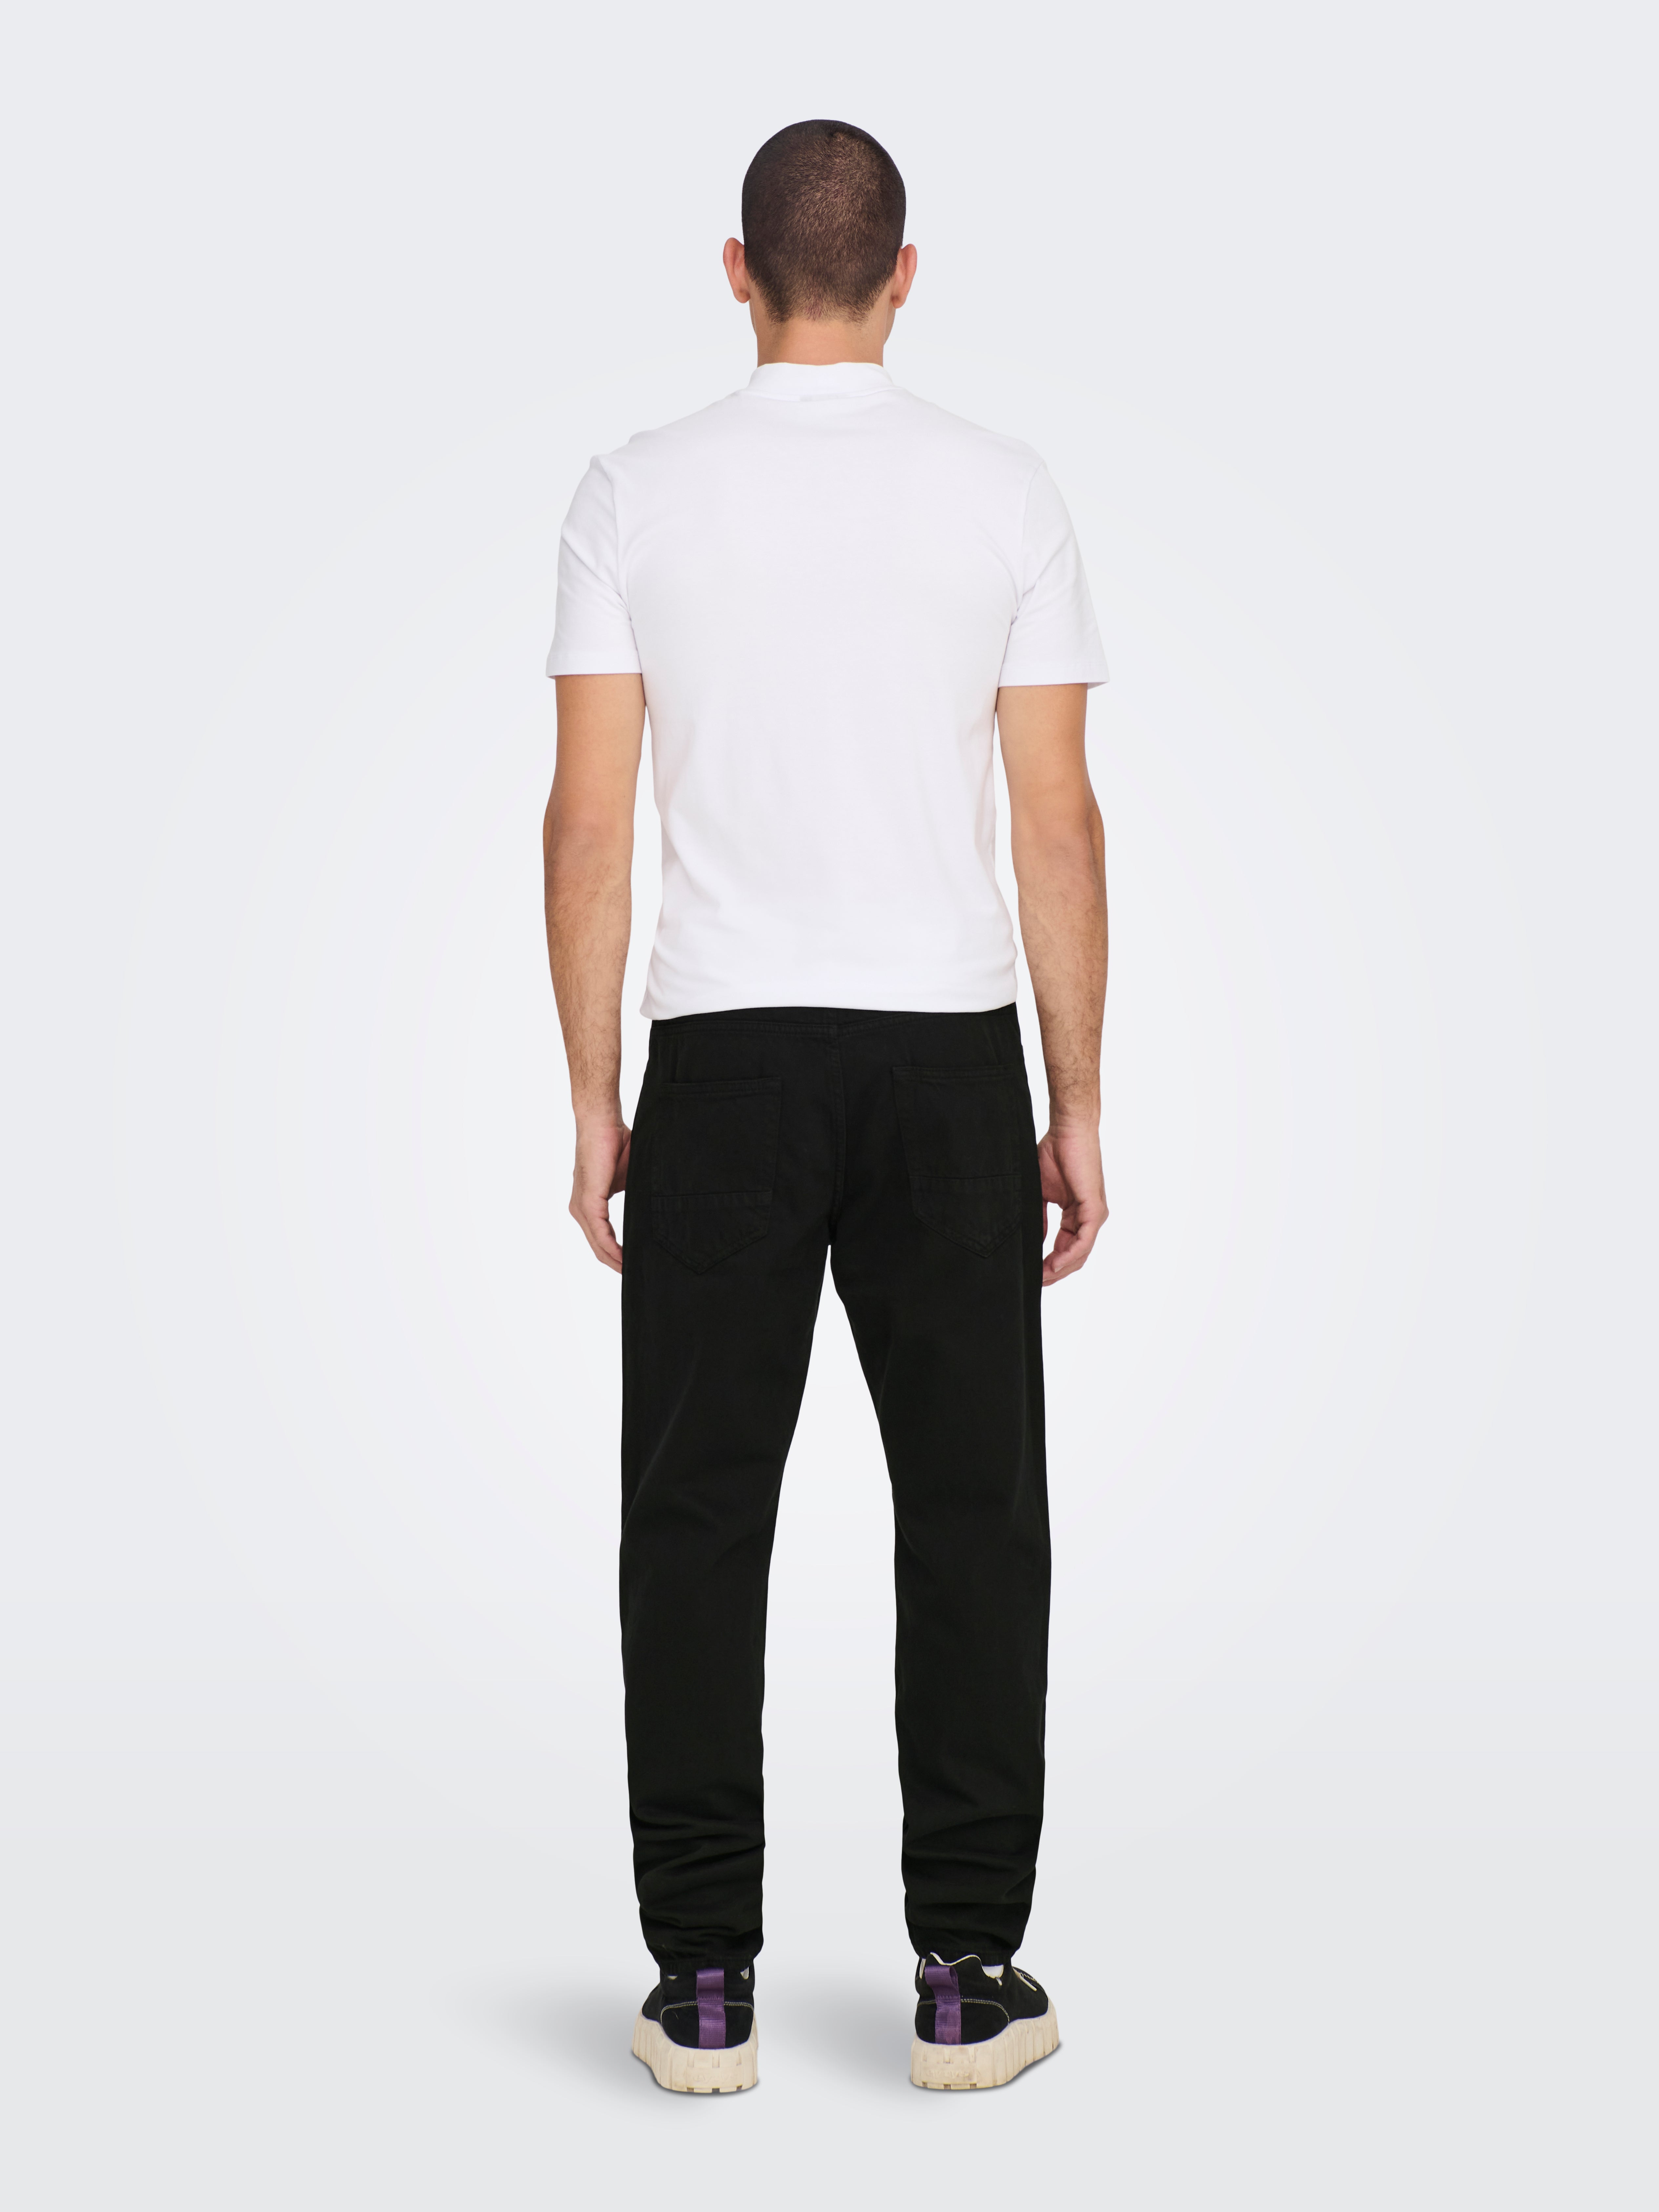 Trousers | Marella Womens Carrot Fit Trousers Black ~ Drdavidcarter